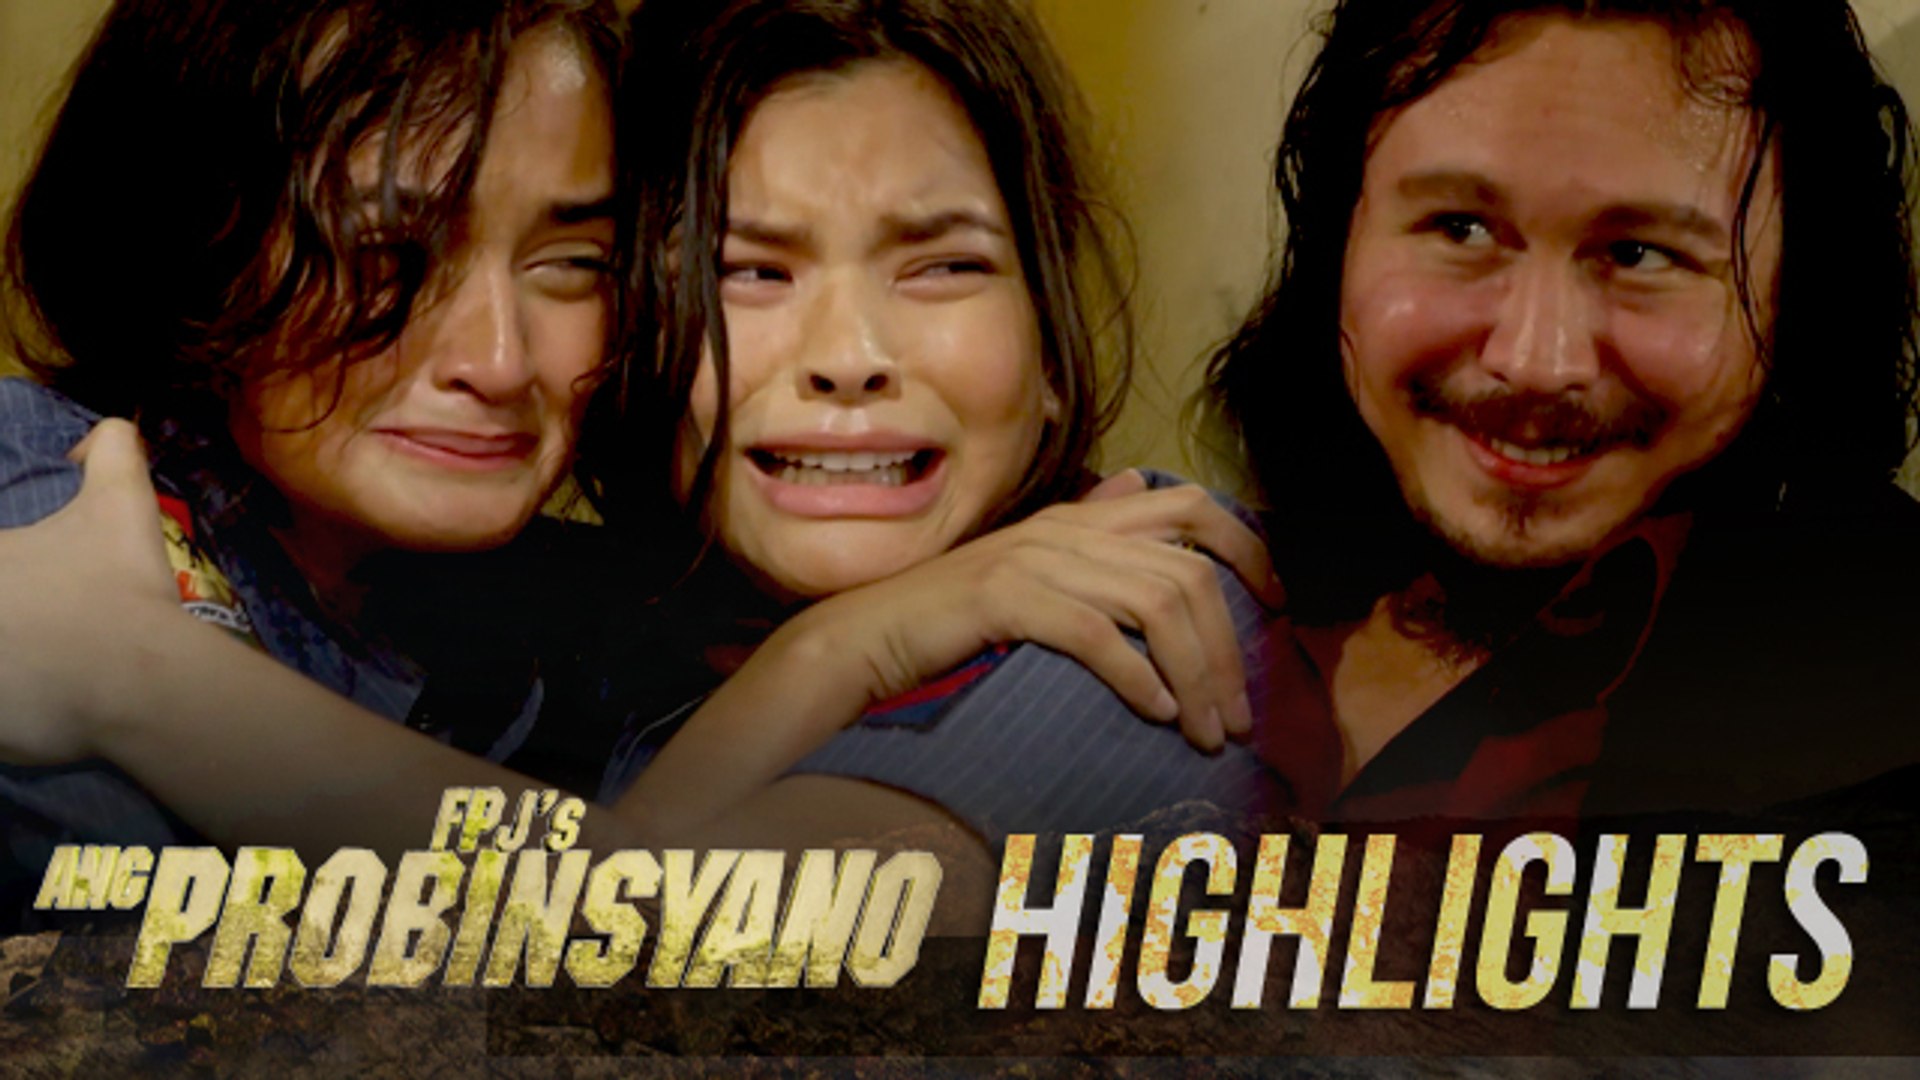 Miranda and Tricia pray for their safety under Bungo's hands | FPJ's Ang   Probinsyano